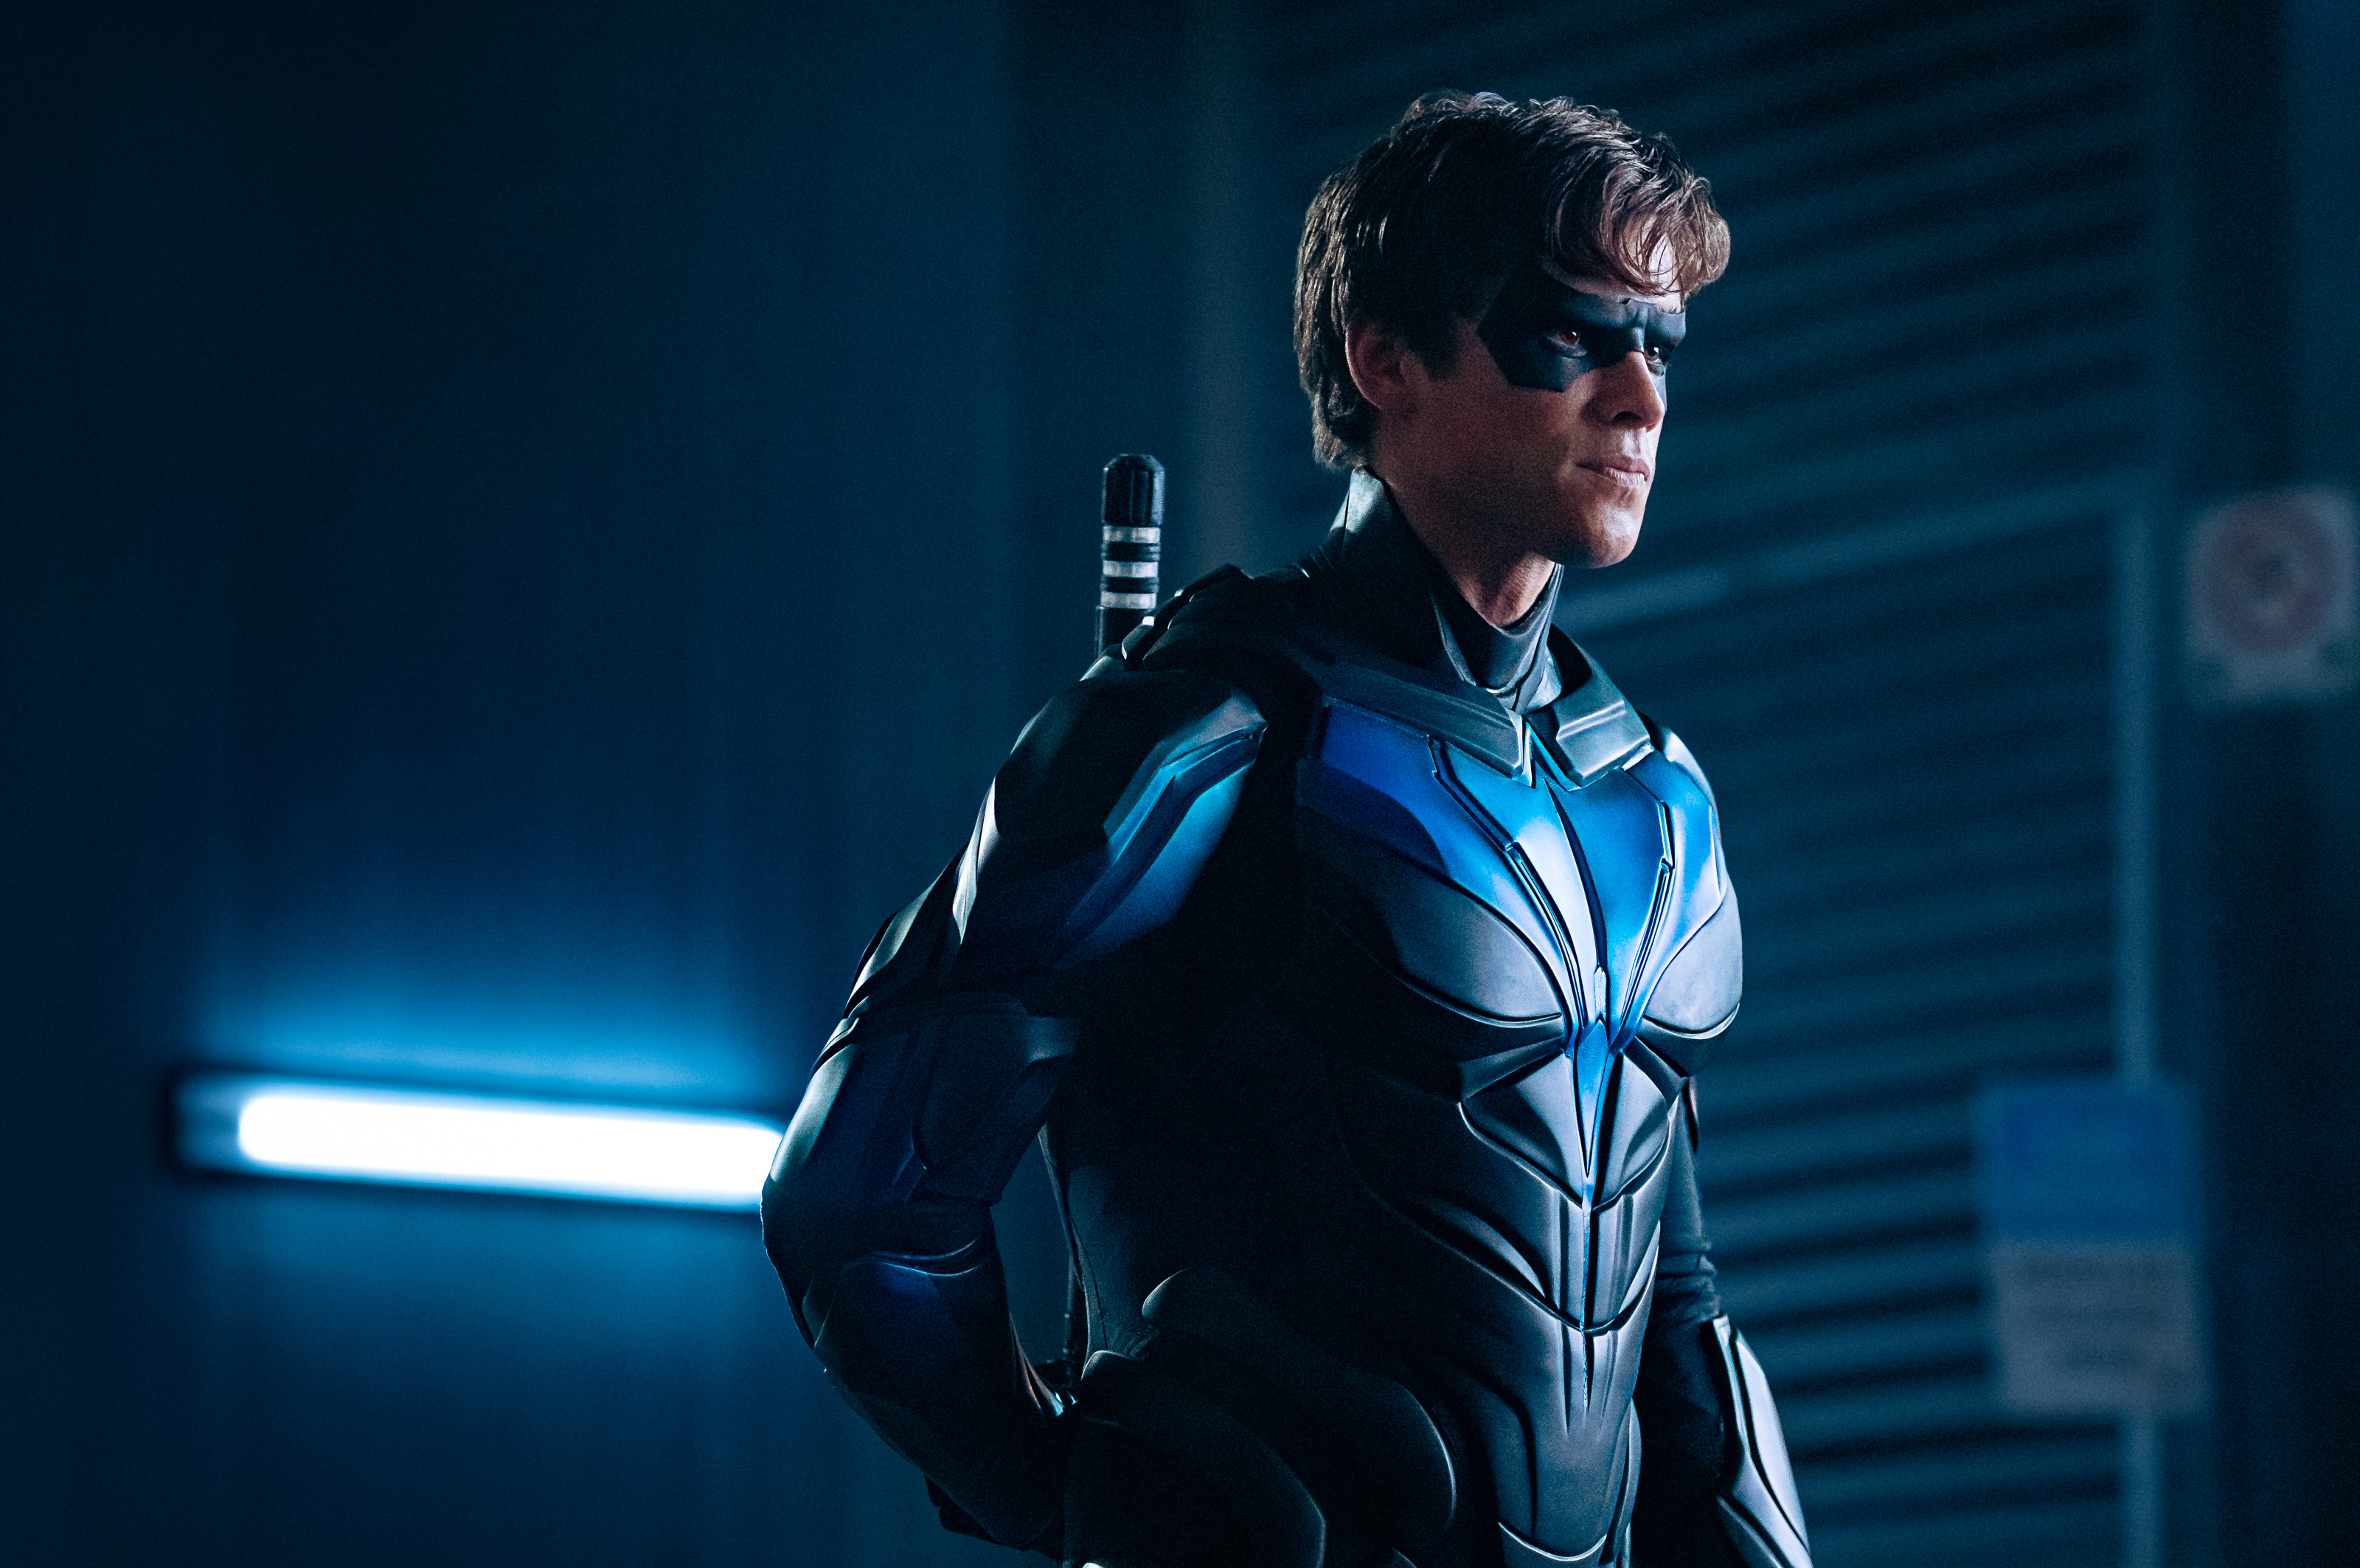 Titans season 3 is not coming to HBO Max in April 2021